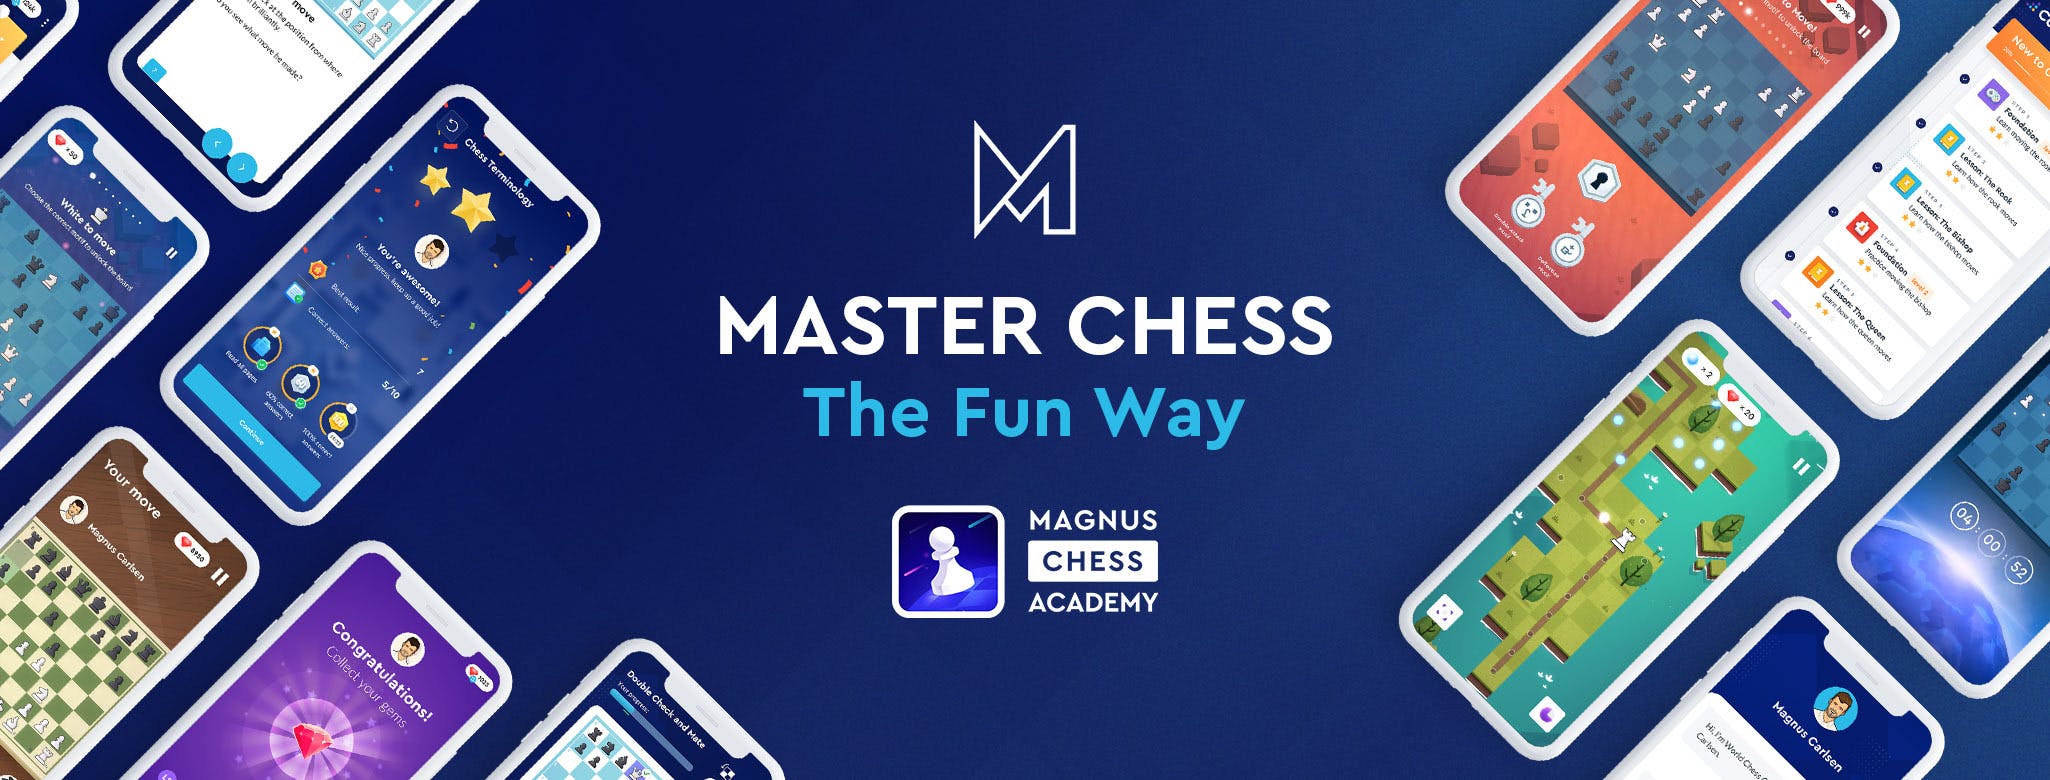 Play Magnus - Play Chess - Apps on Google Play